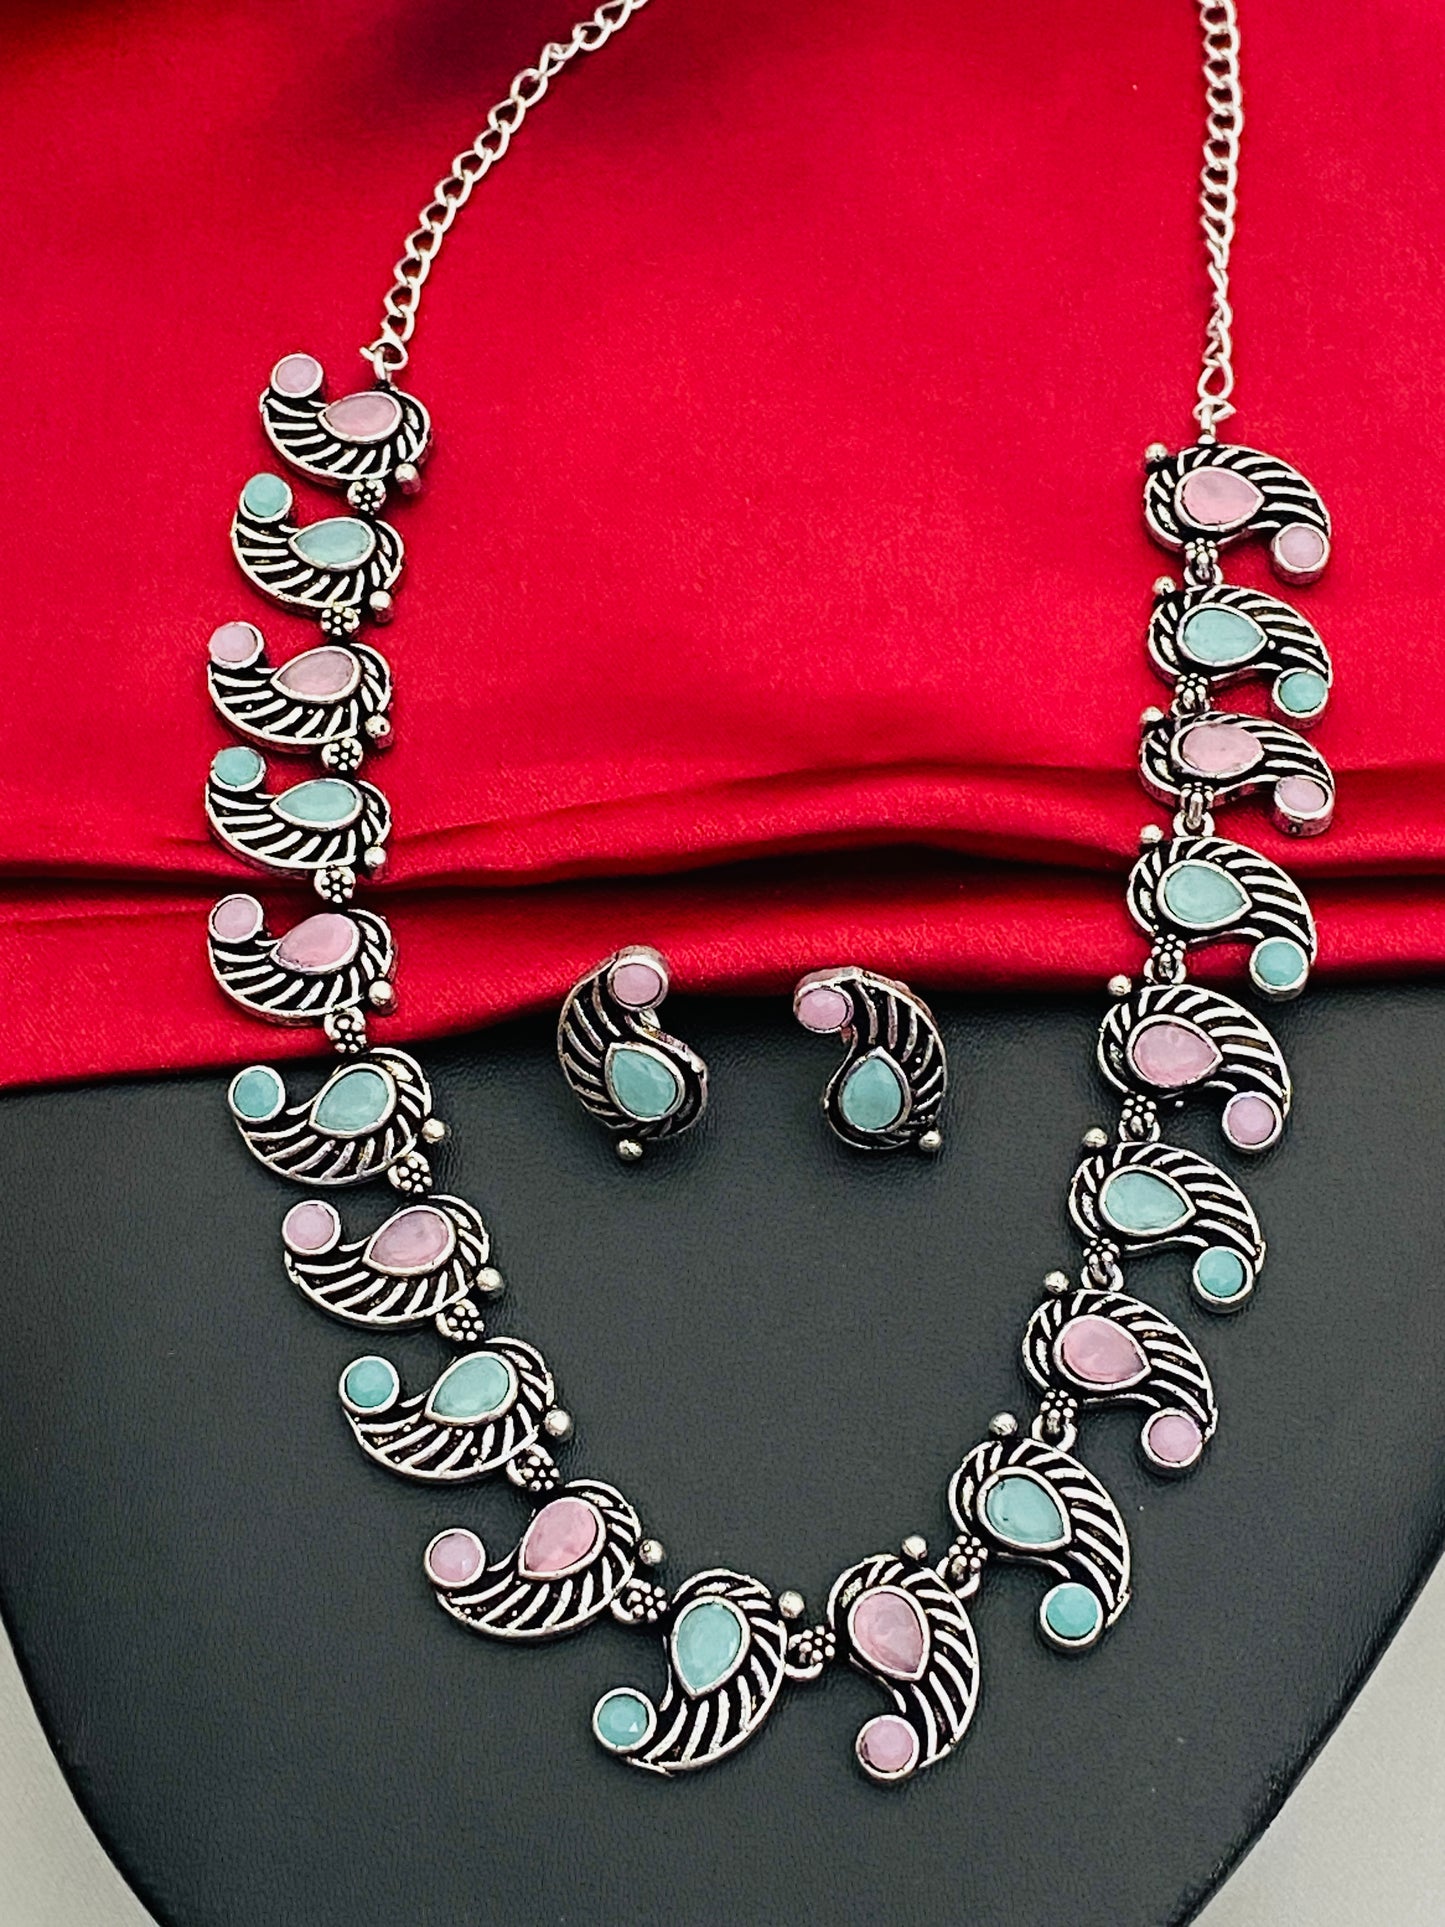 Pleasing Multicolor Stone Beaded Mango Design Silver Toned Oxidized Necklace With Earrings